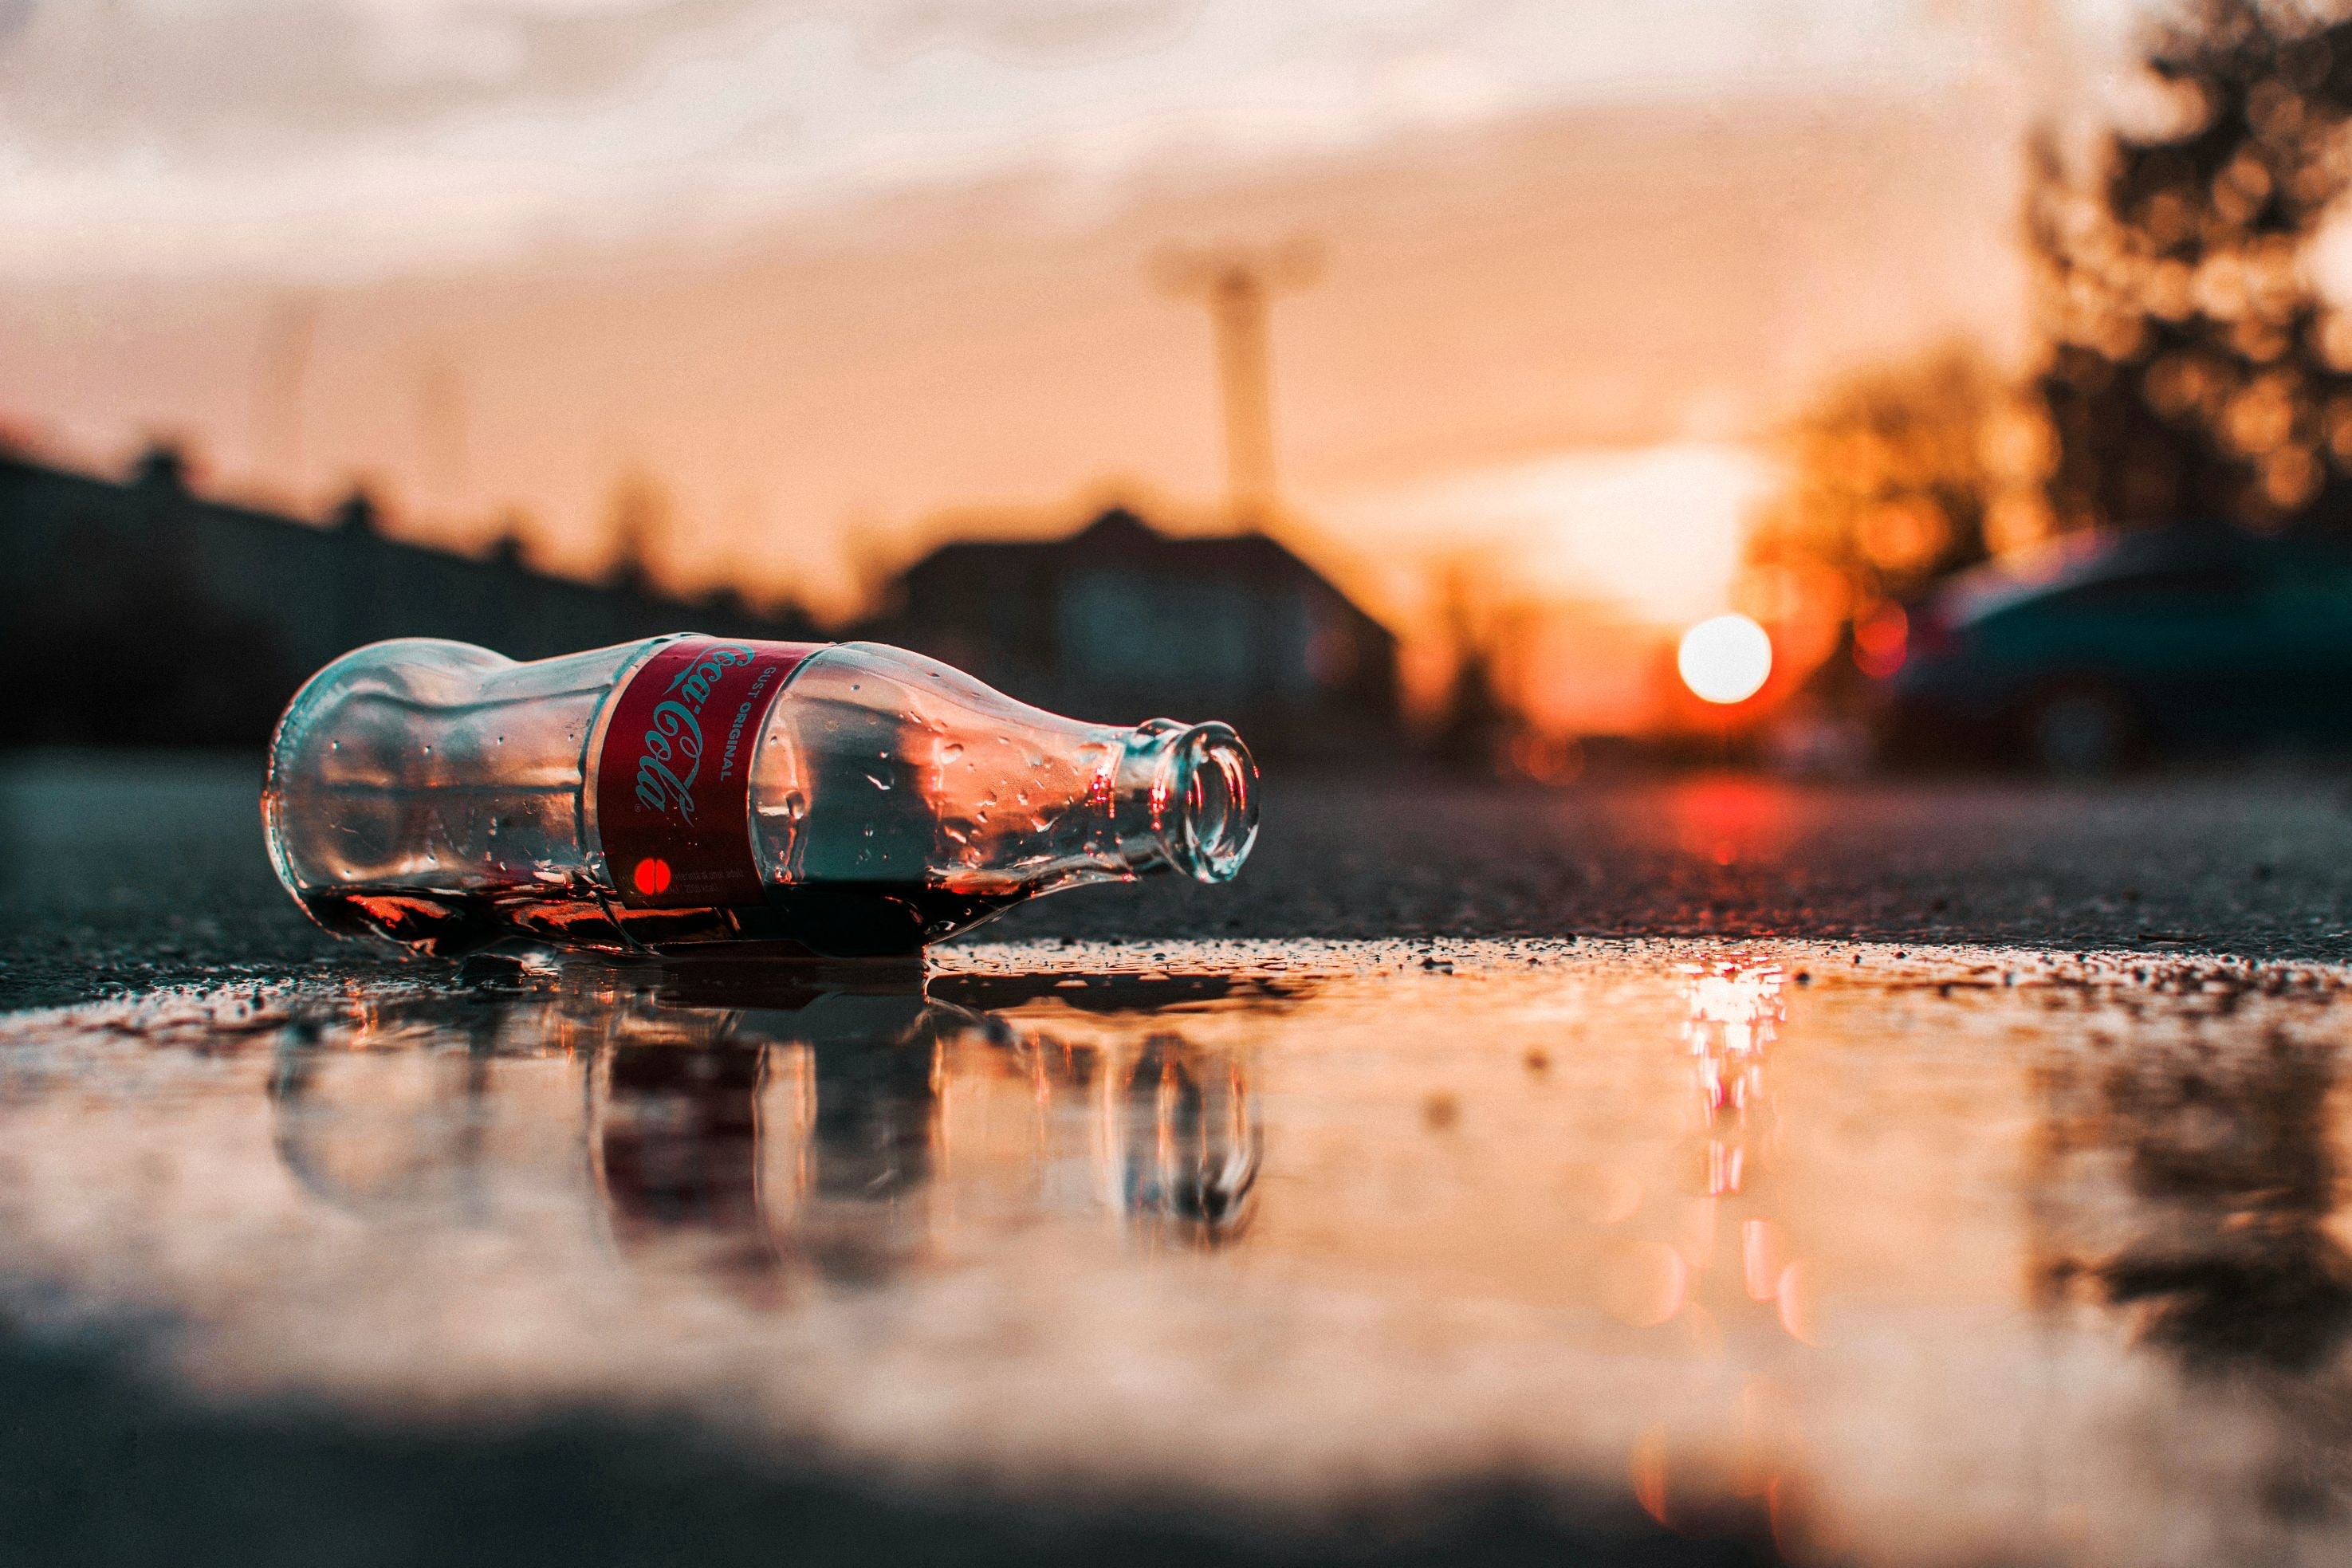 Coca-Cola is Reportedly the Biggest Plastic Polluter